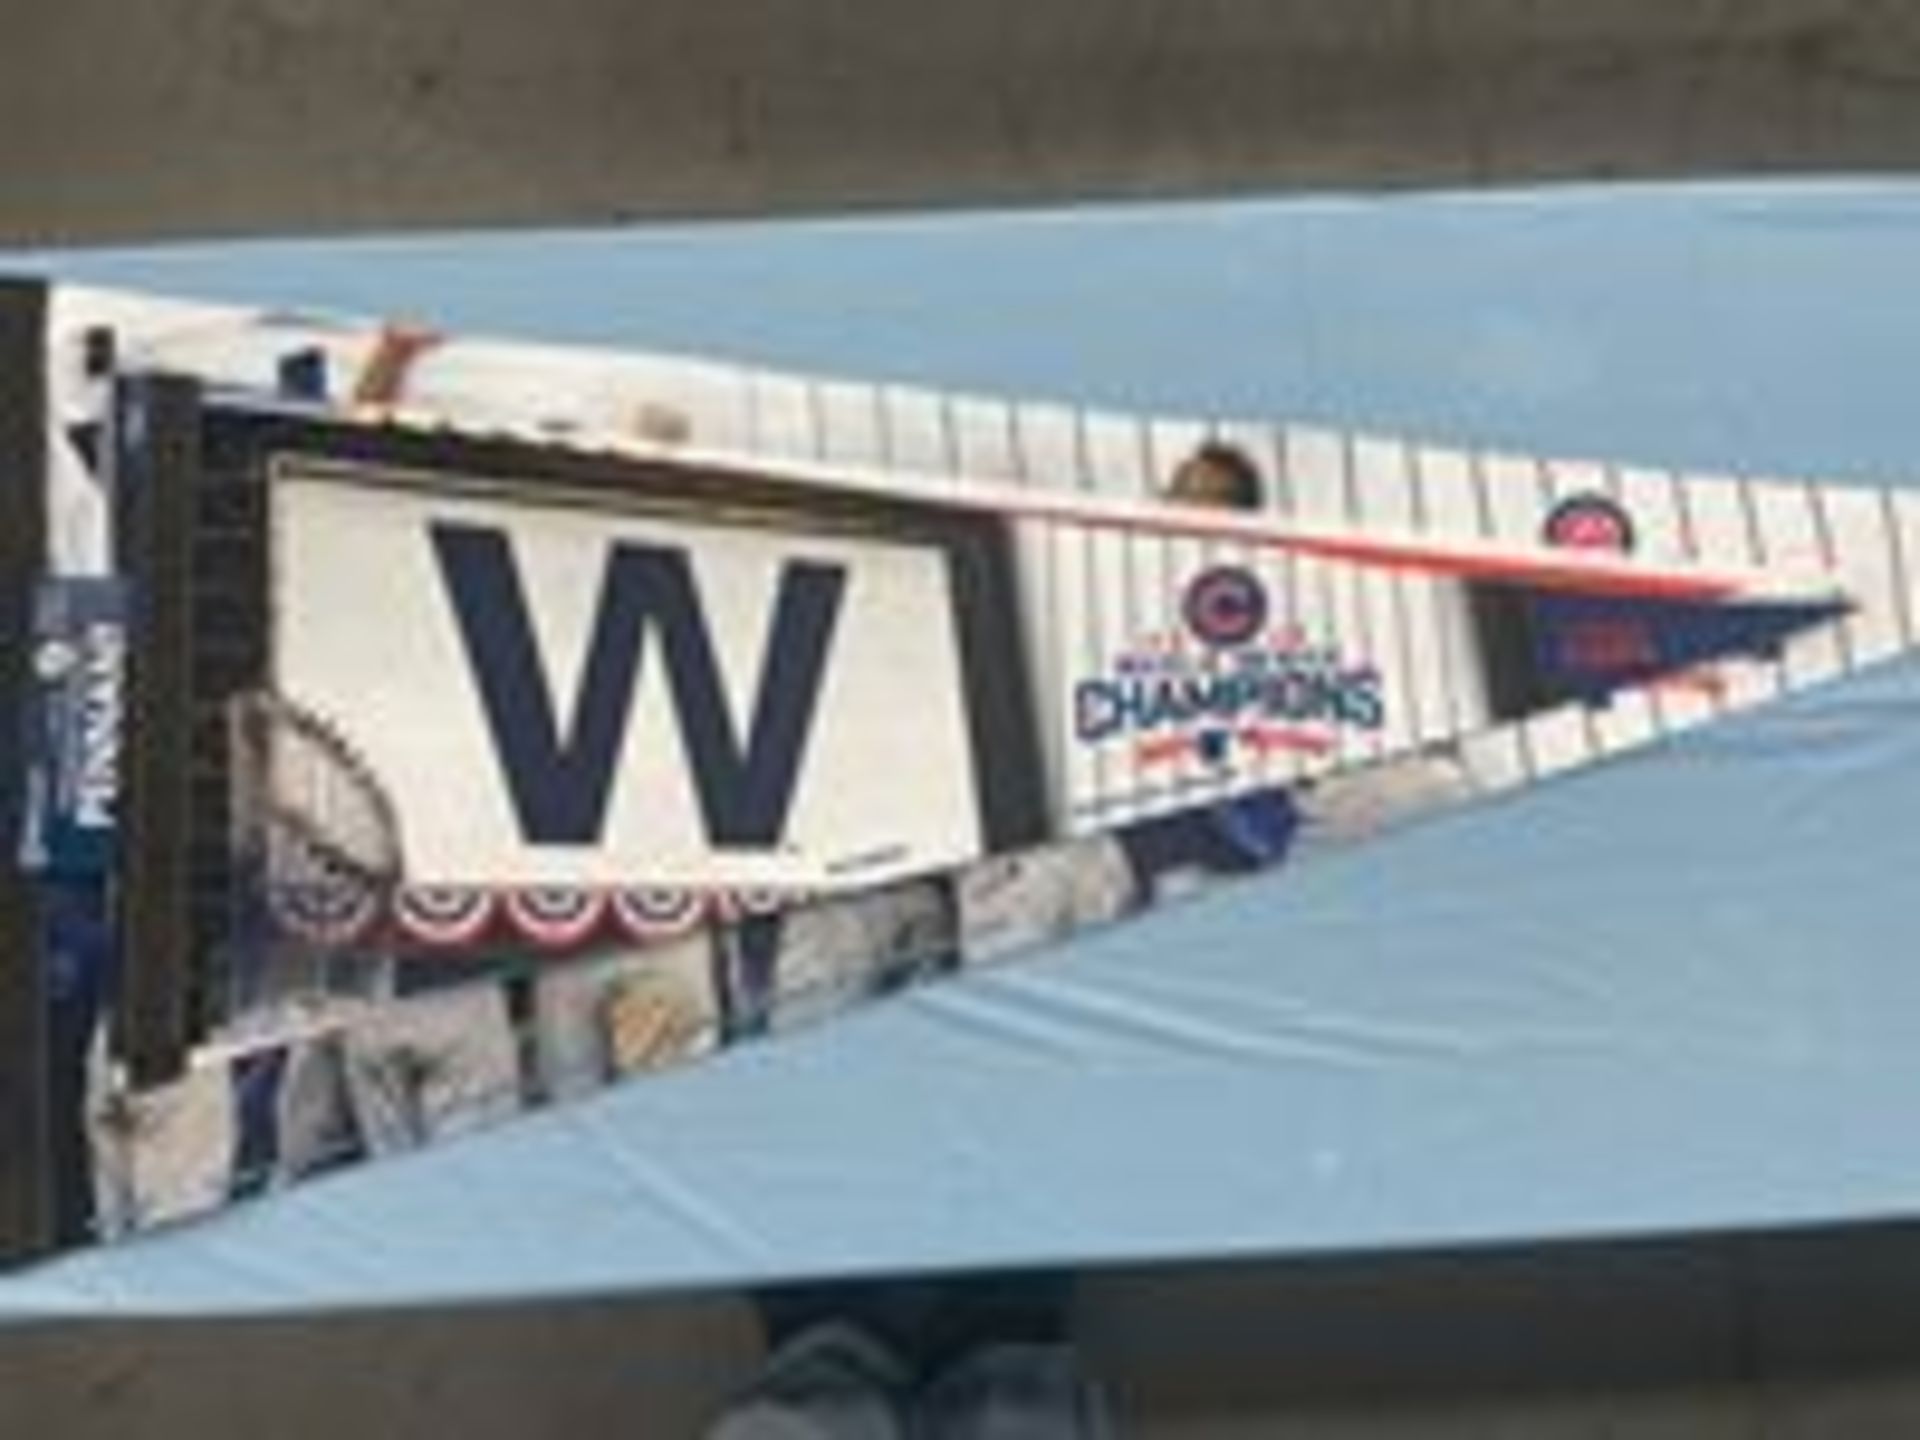 (Lot) 2016 Chicago Cubs World Series Cubs c/o: 5 Win Craft Pins, Opening Day Ticket Stub in case - Image 10 of 10